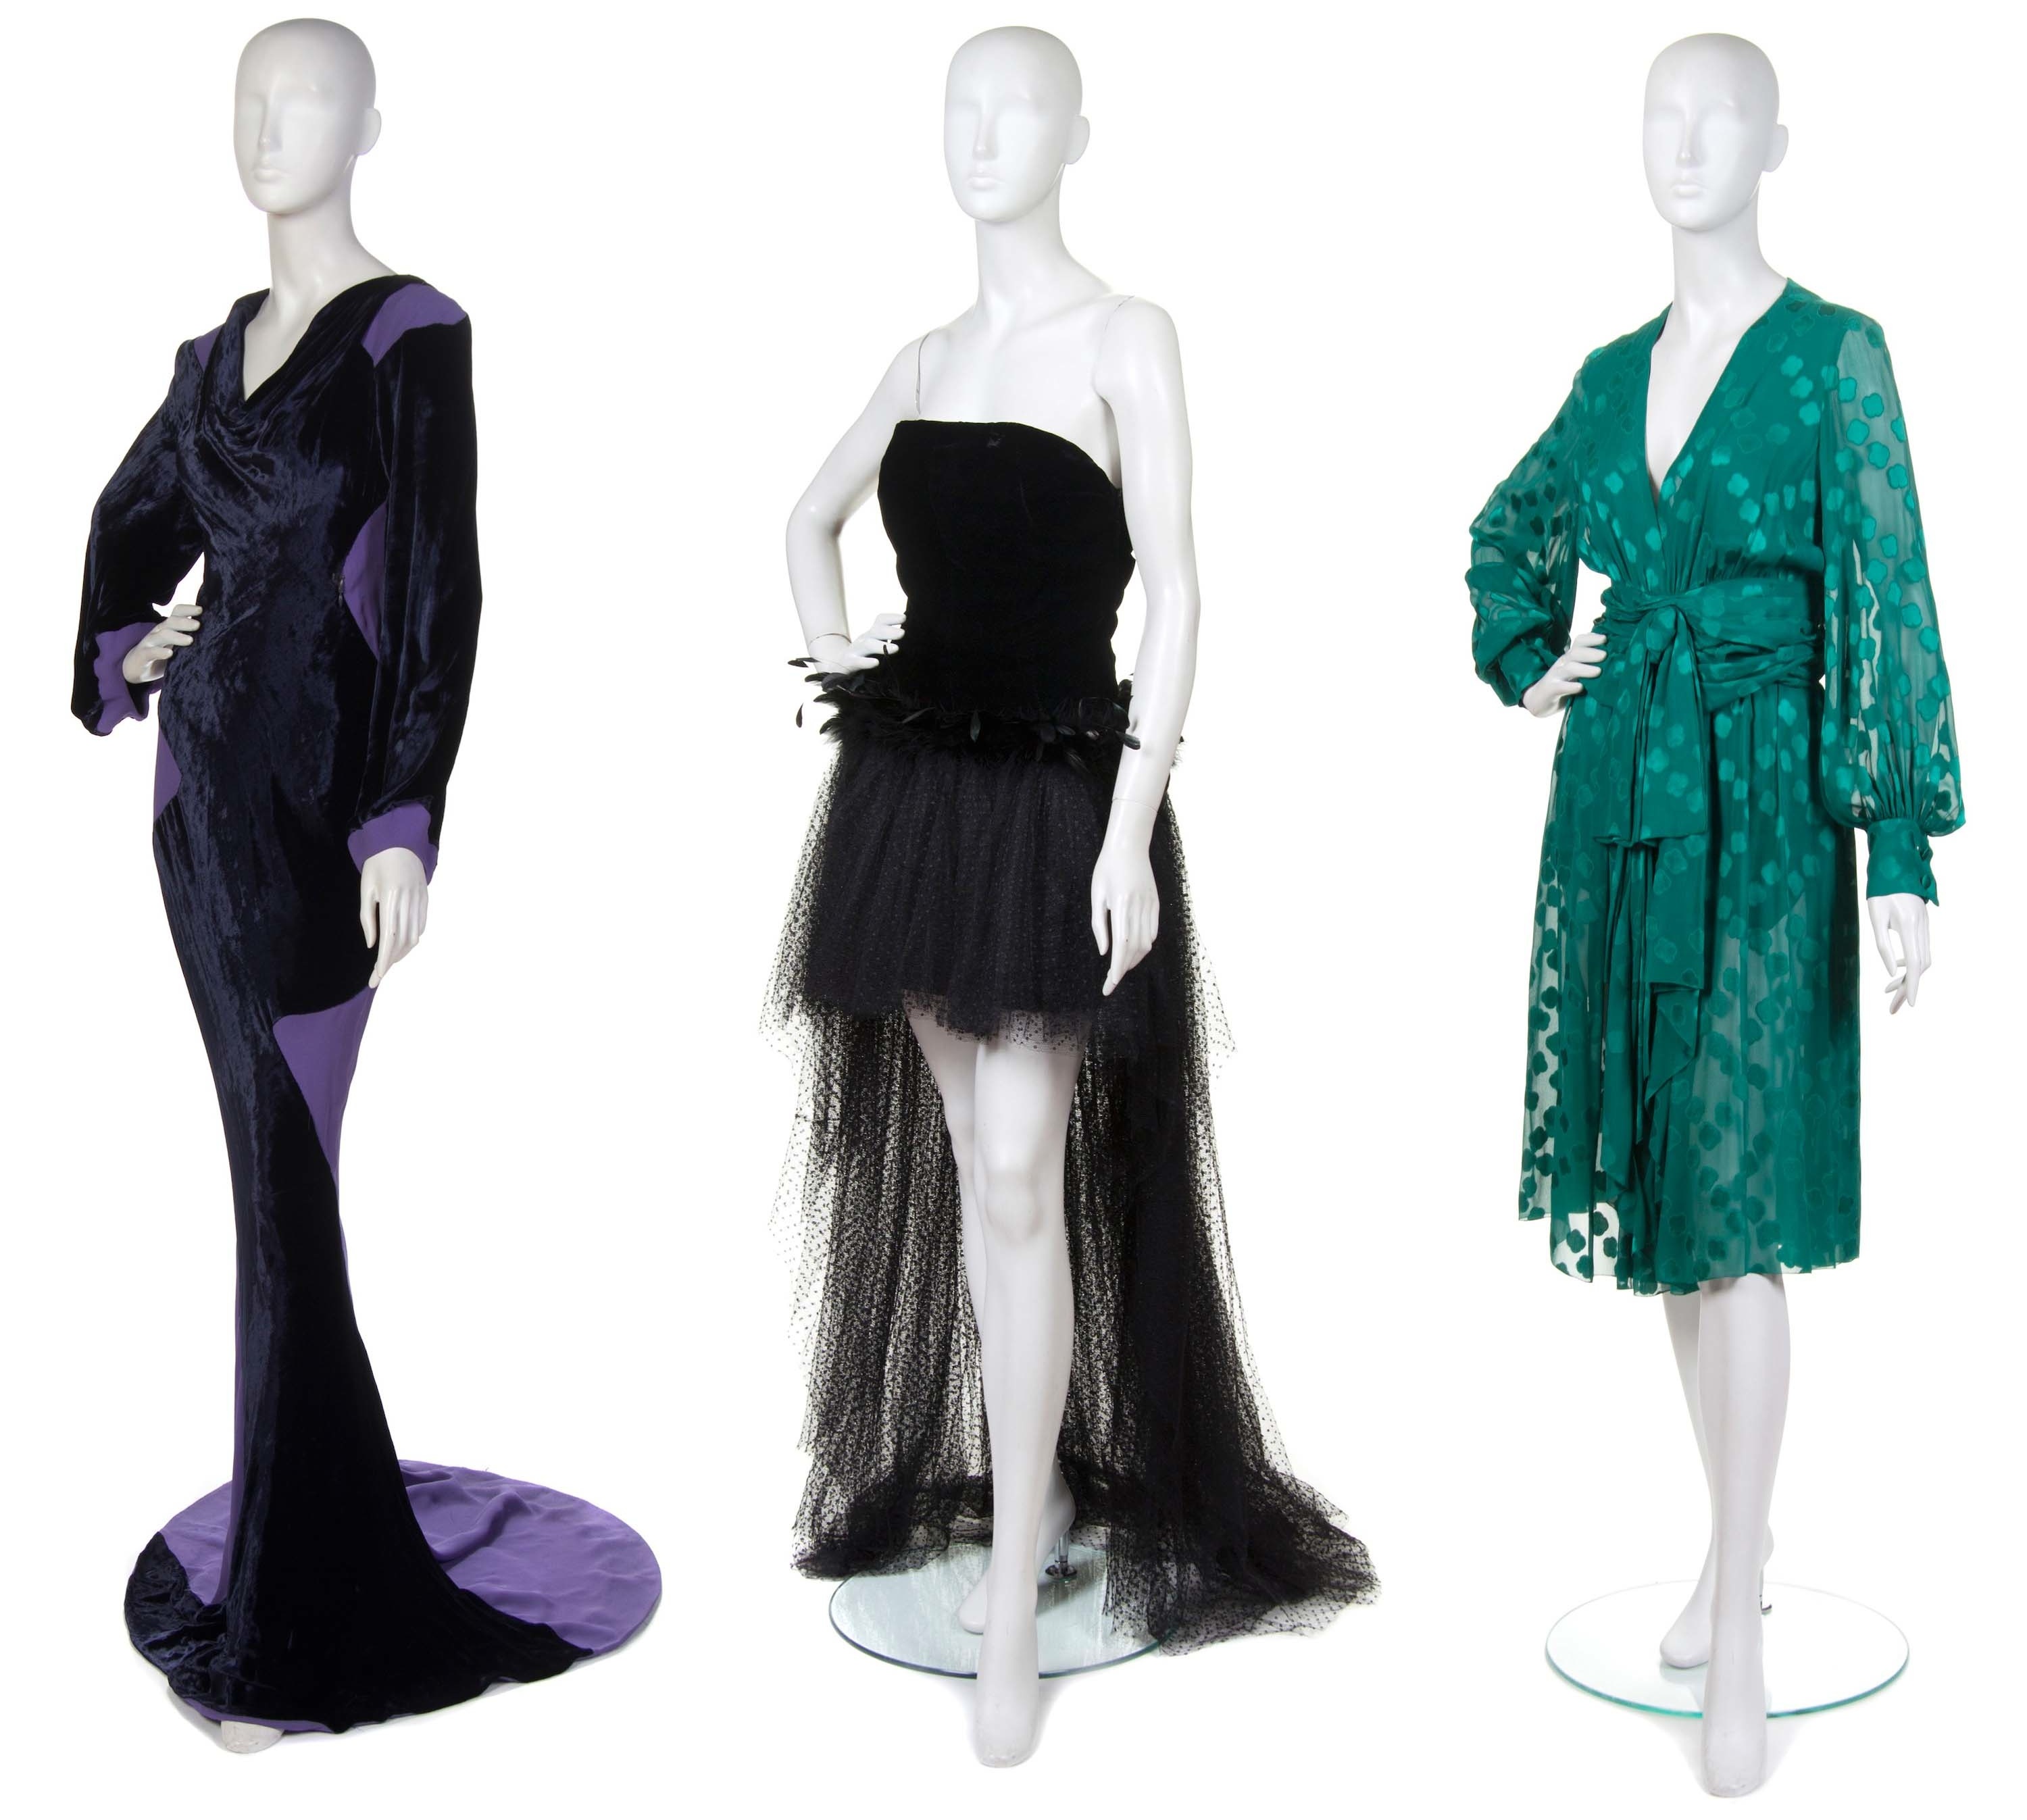 <strong>Vivienne Westwood</strong> evening gown in navy velvet and purple crepe—$300-$500; <strong>Givenchy</strong> evening gown in black velvet, lace and feathers—$300-500; <strong>Christian Dior</strong> dress in green jacquard—$400-600.